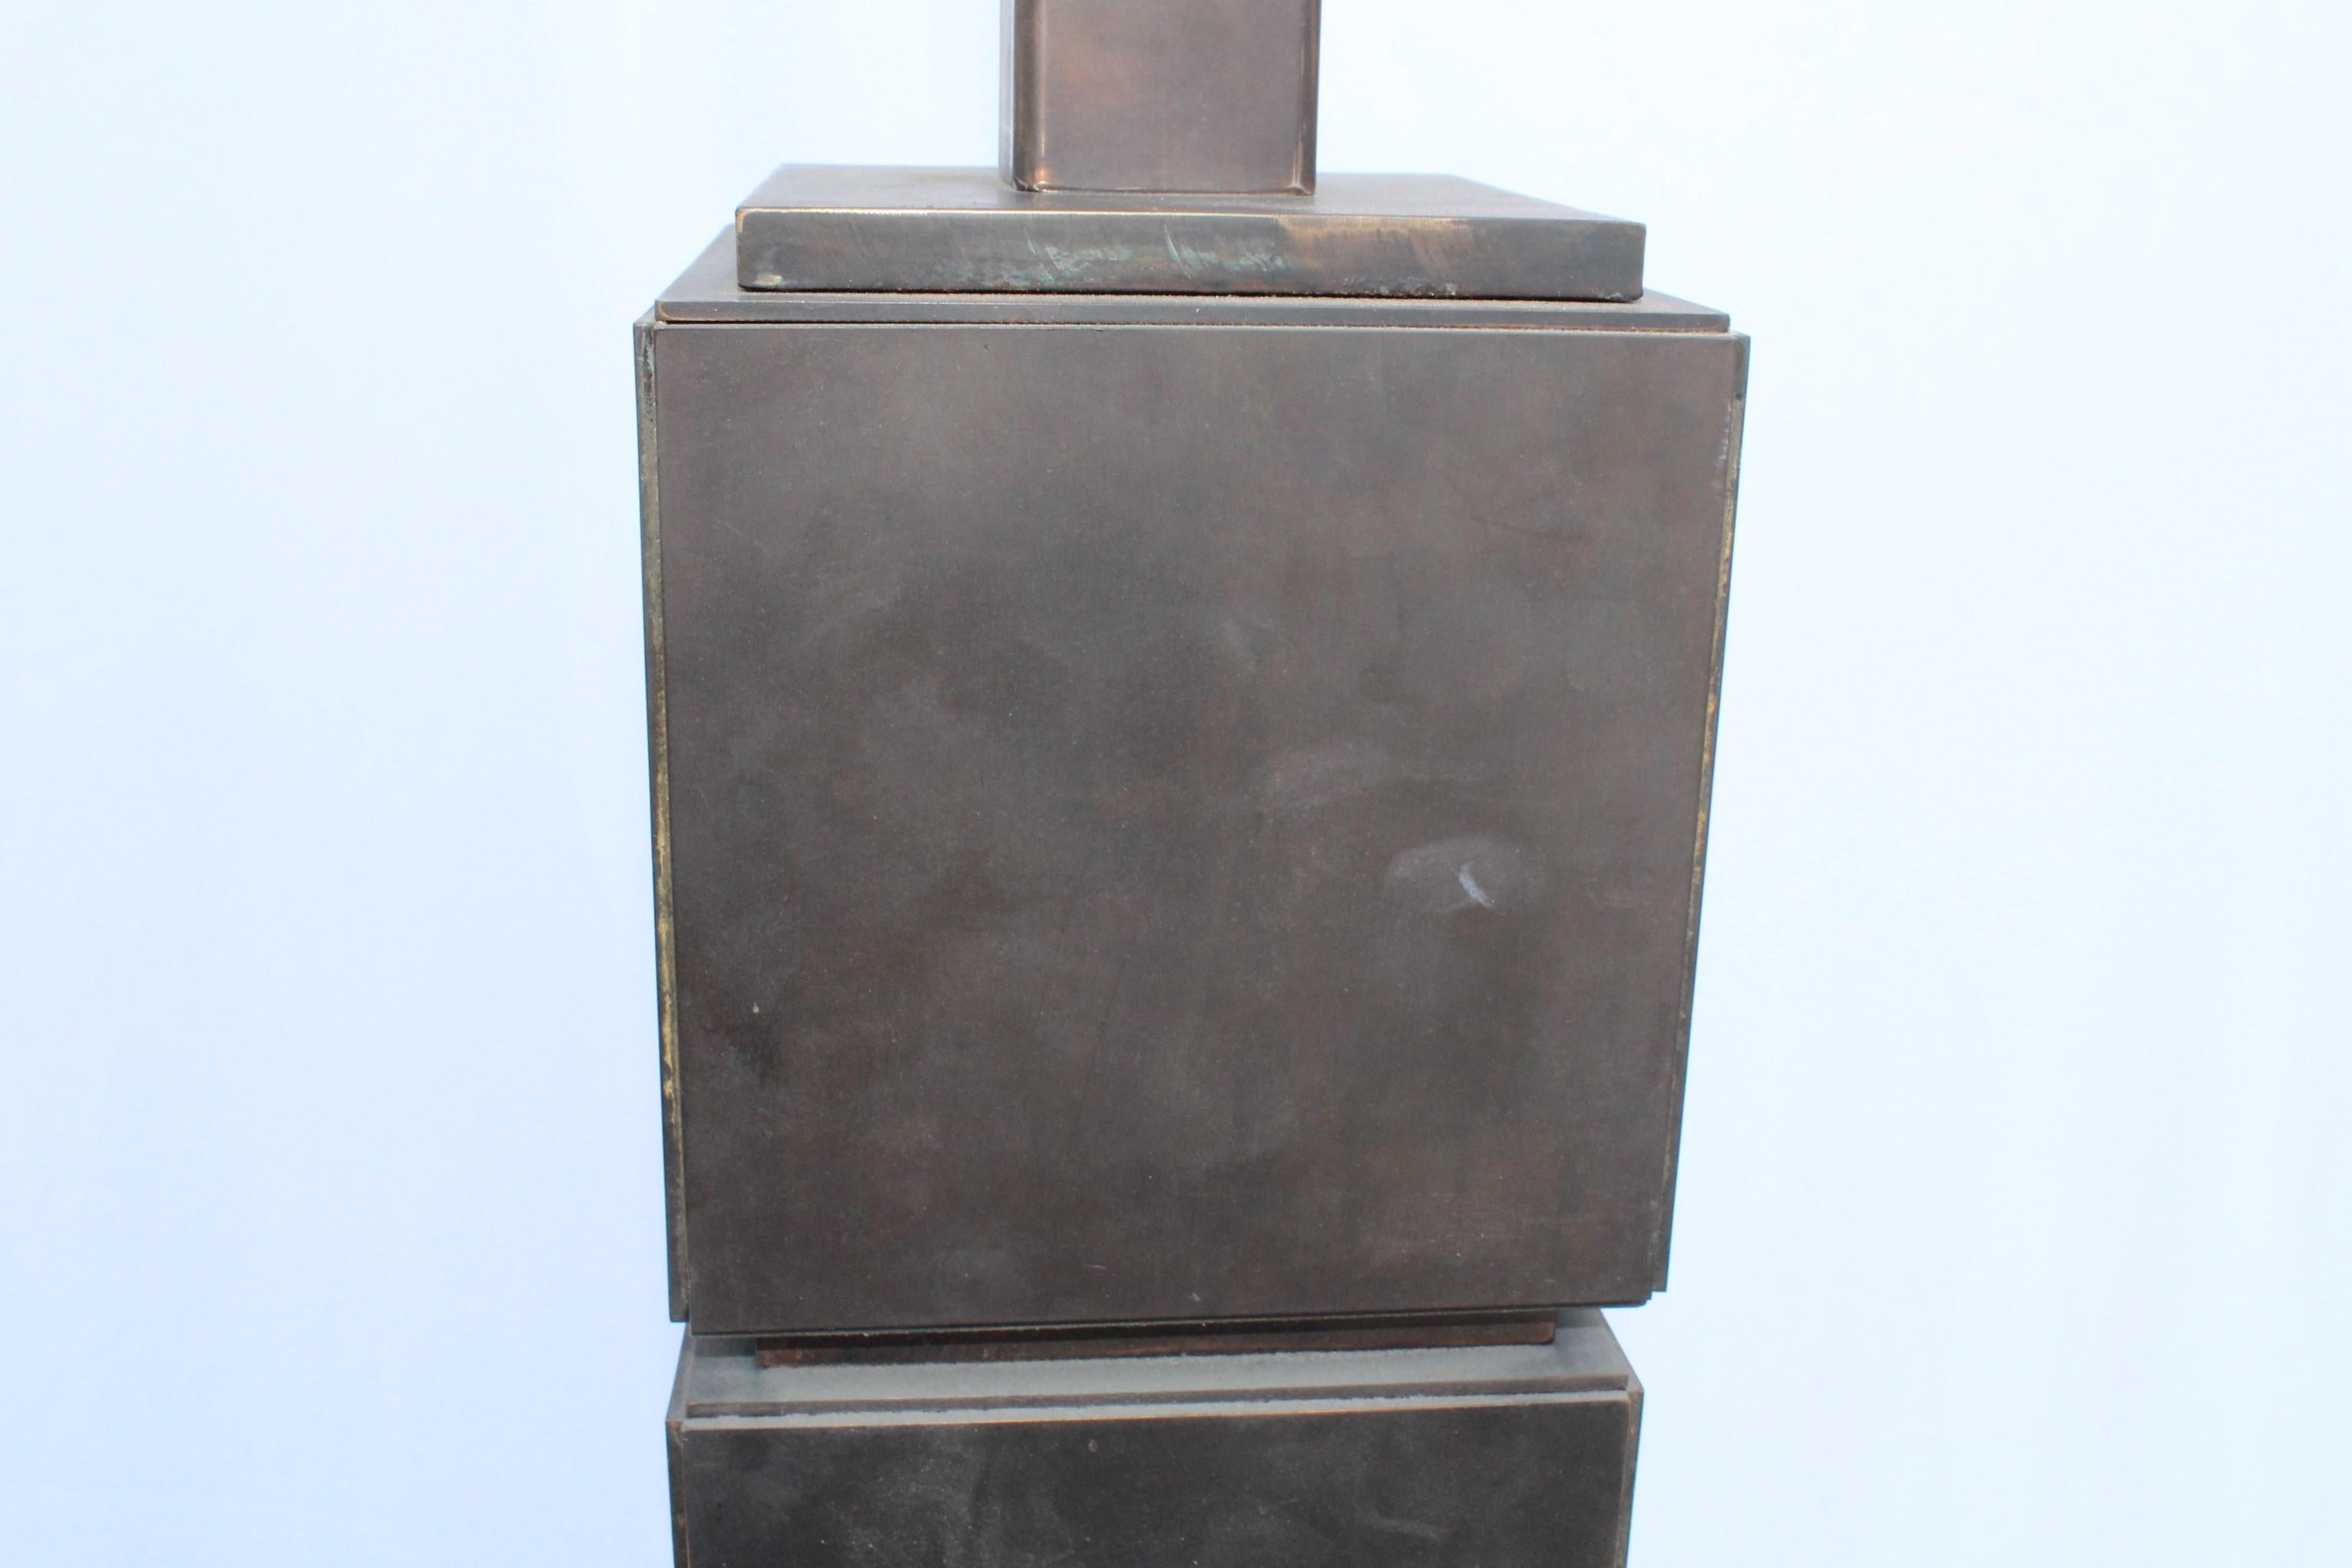 North American Mid-Century Modern Floor Lamp Steel Boxs Stacked Designer Sample For Sale